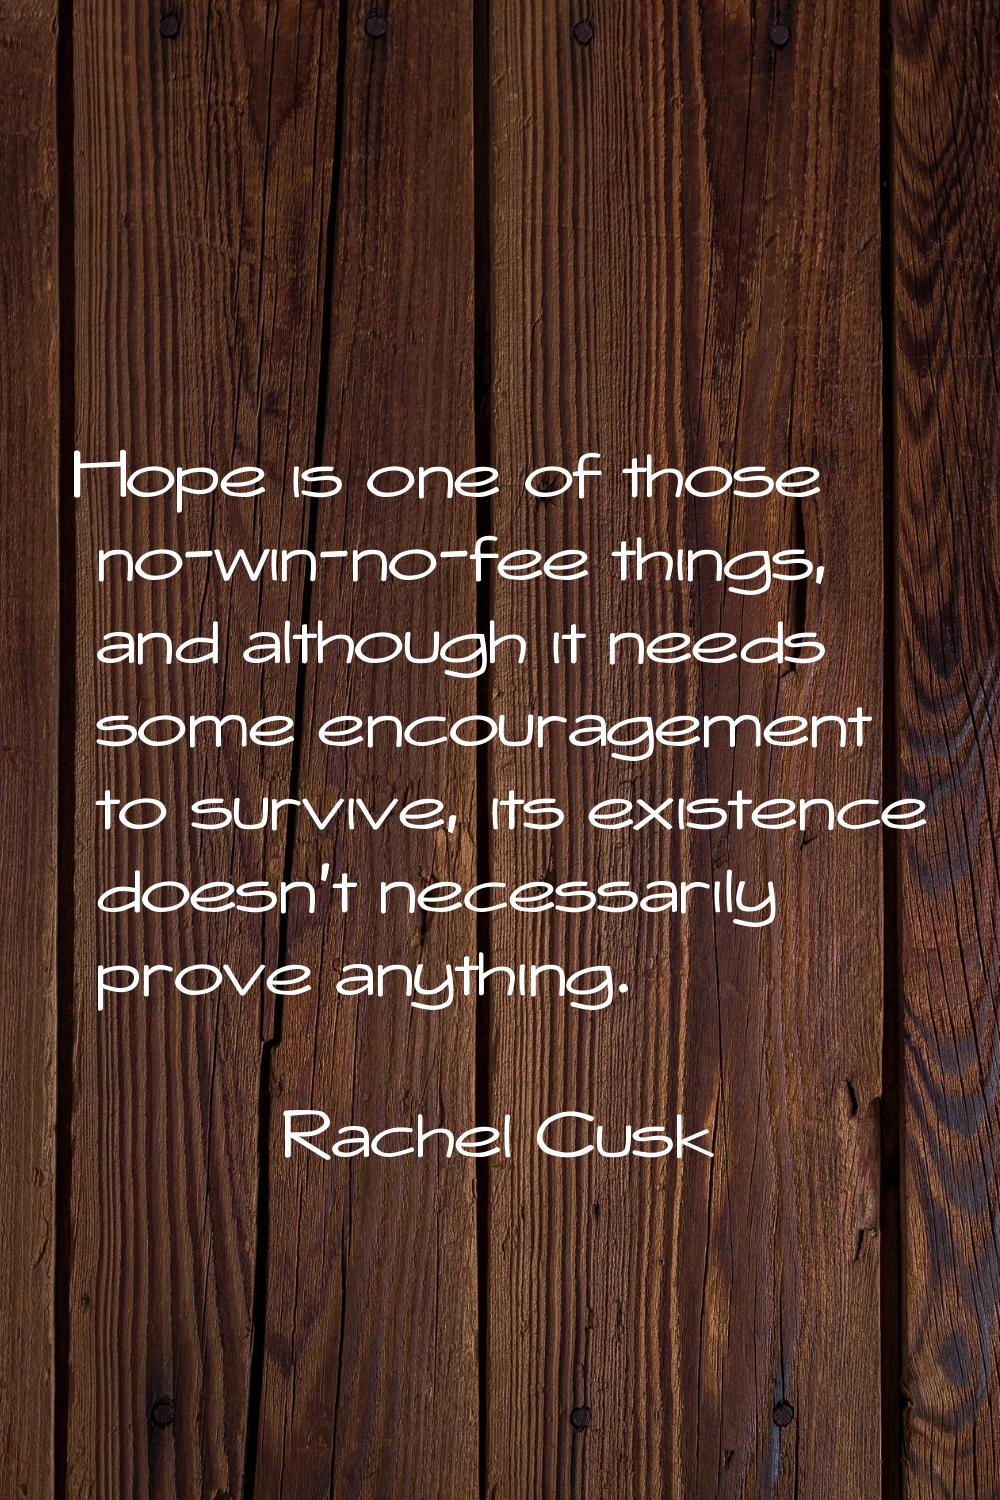 Hope is one of those no-win-no-fee things, and although it needs some encouragement to survive, its